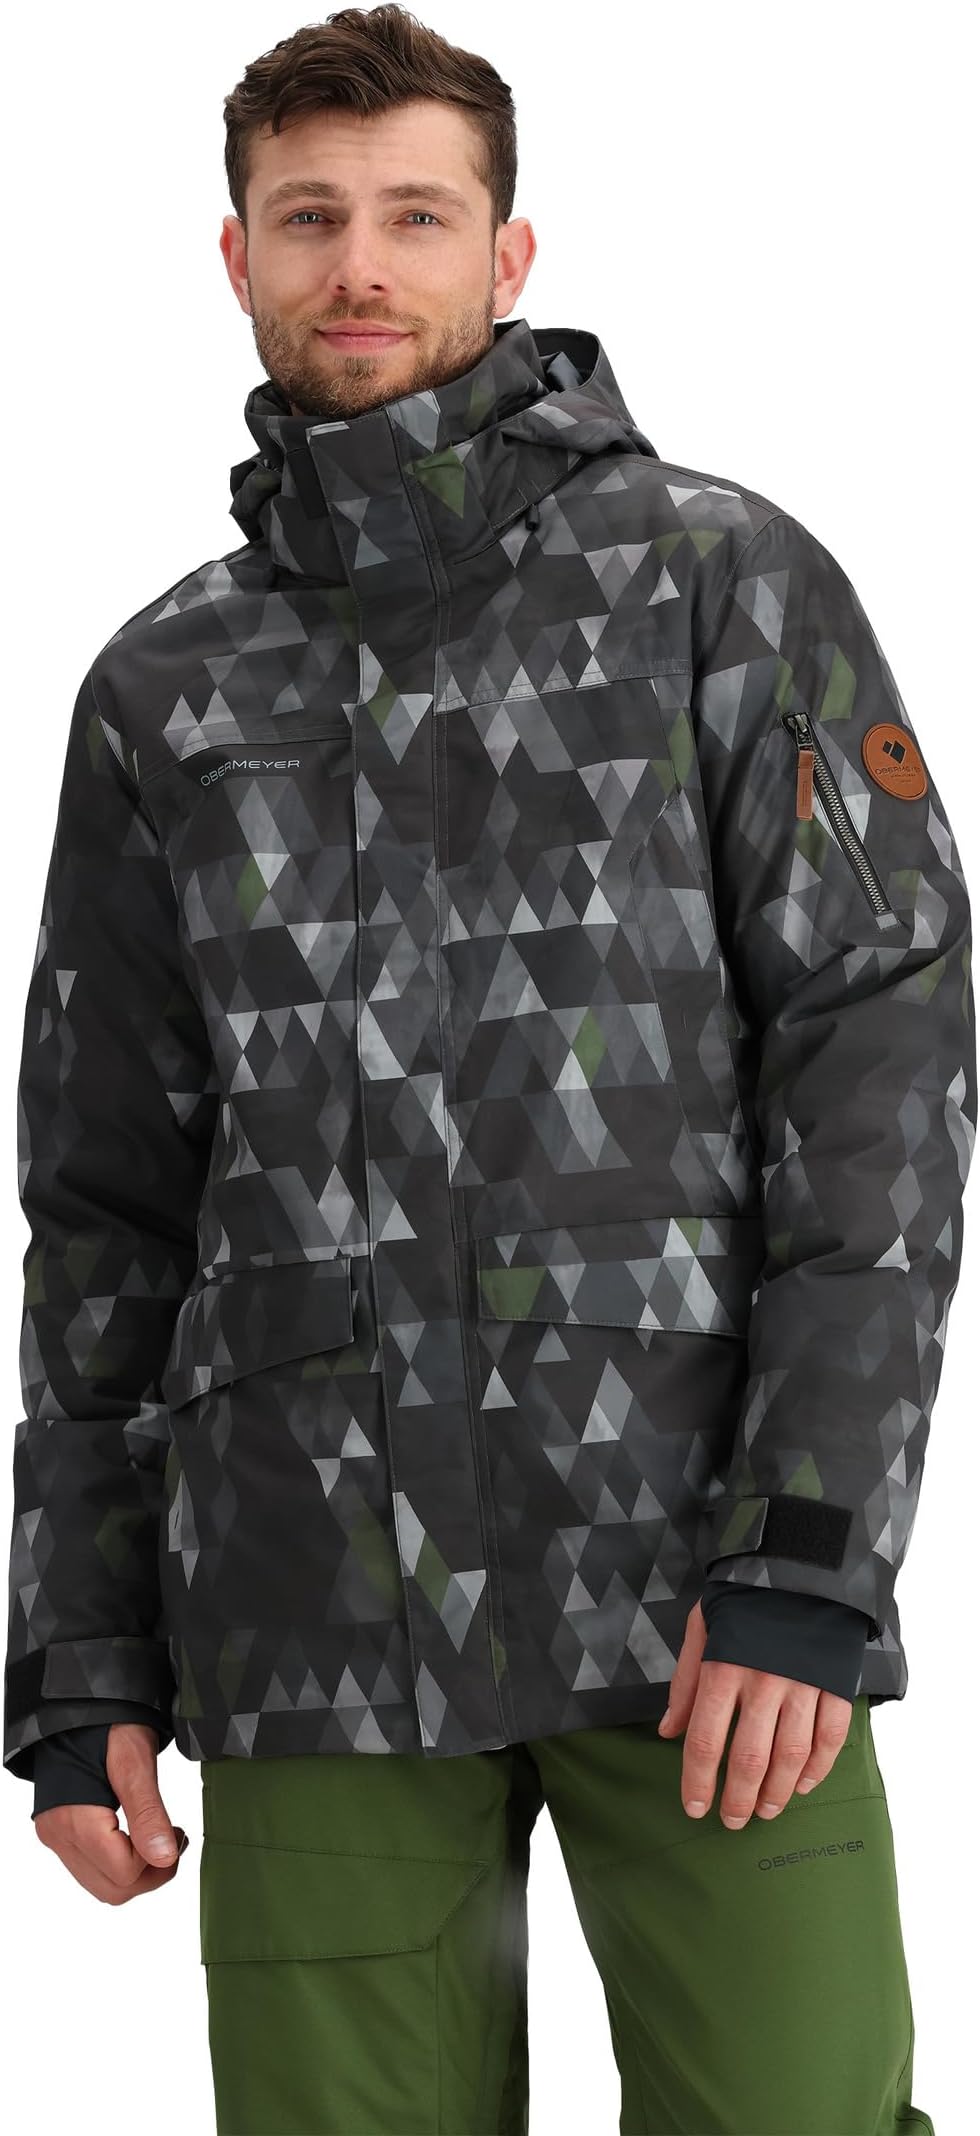 Куртка Ridgeline Jacket Obermeyer, цвет Out Of Bounds mcdermid val out of bounds